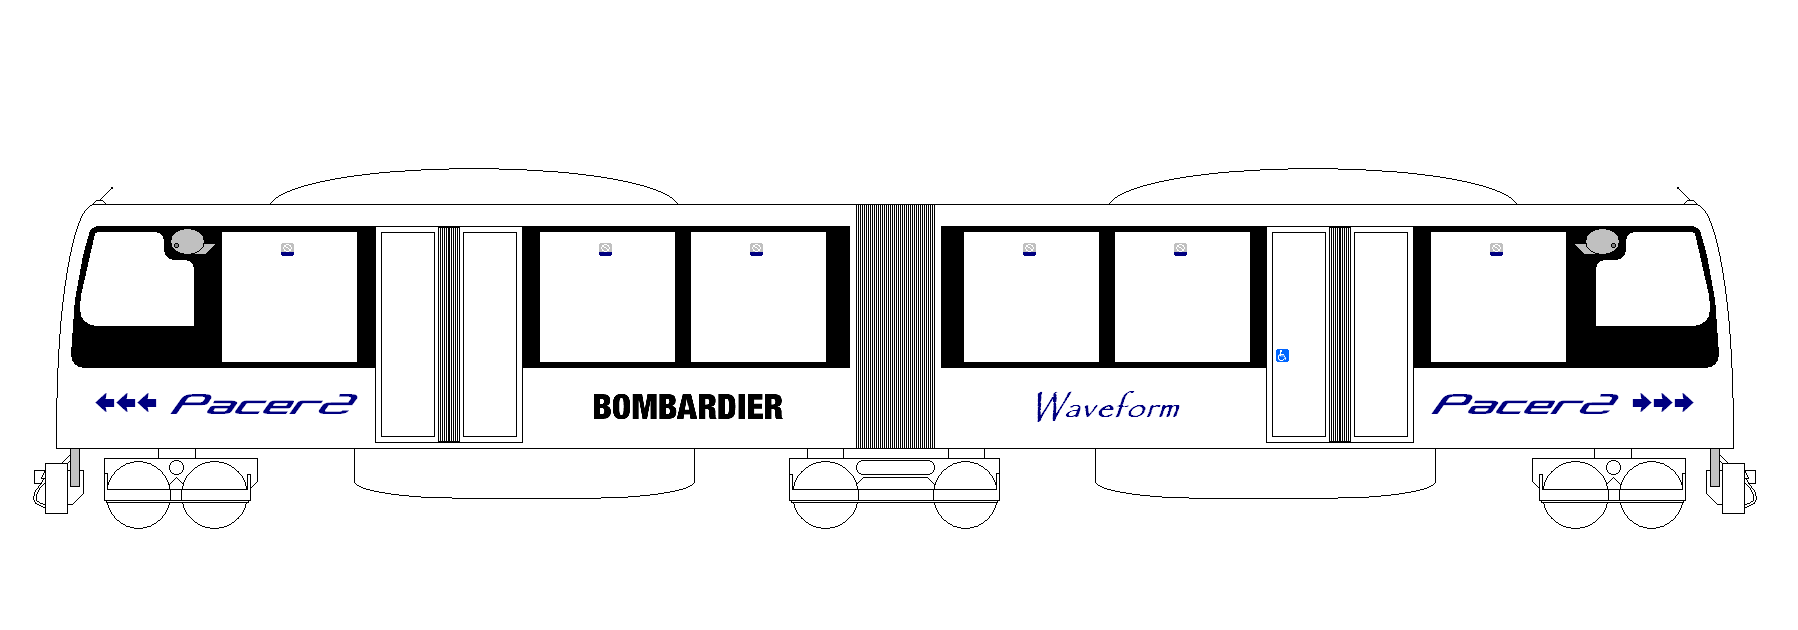 File:Wiki new railbus.PNG.